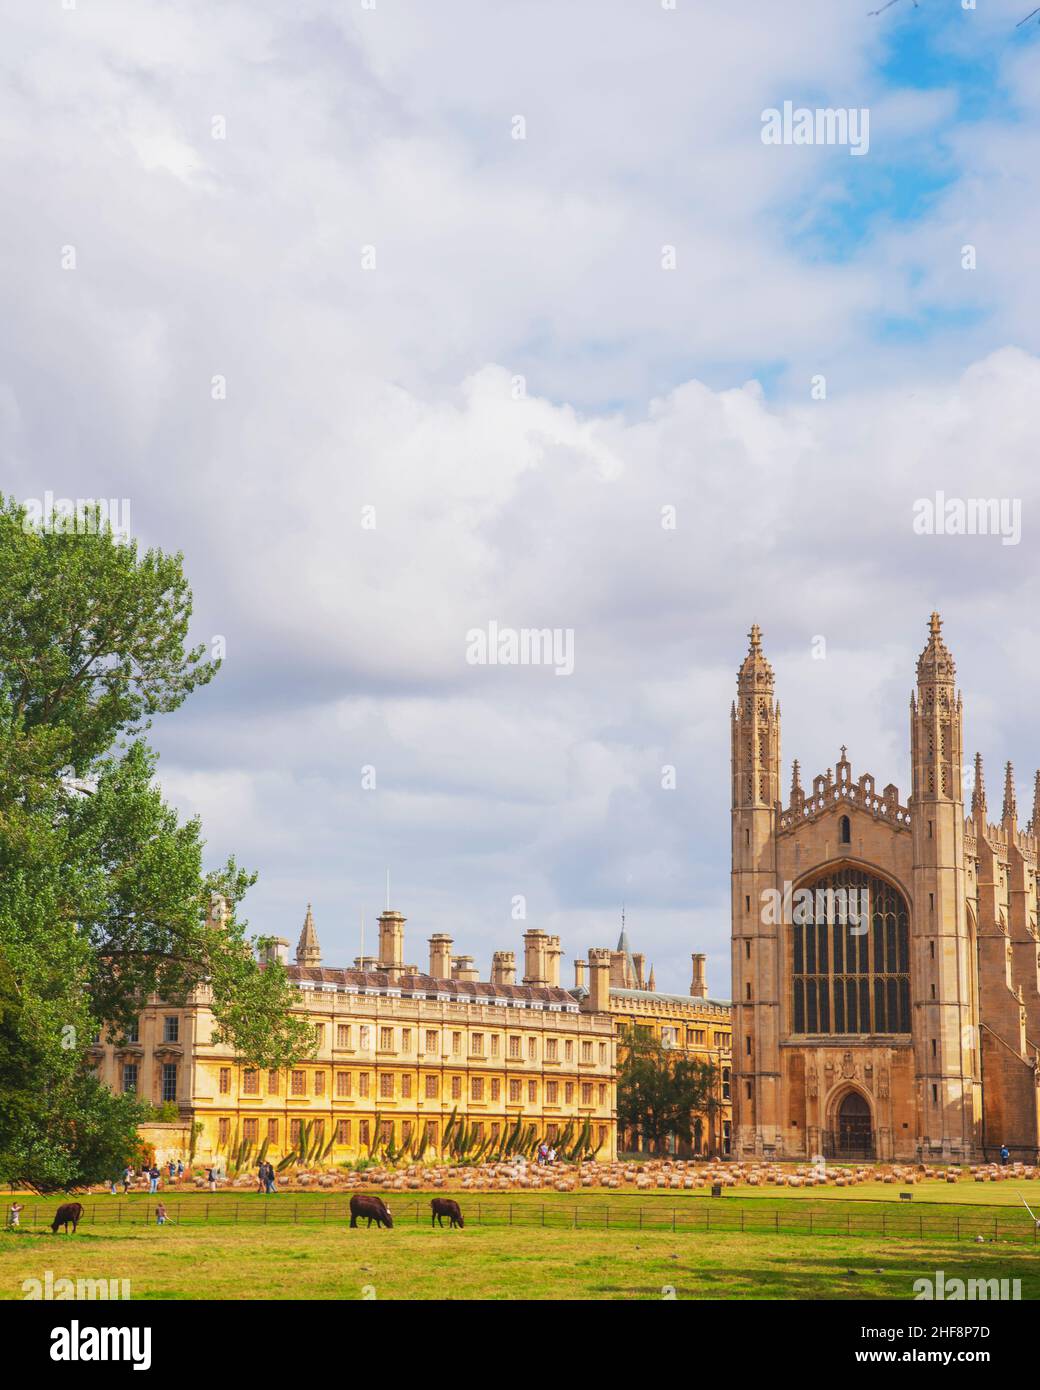 Kings College Cambridge, taken from the back of the college across the river Cam. You can see the University cows in the foreground. Stock Photo